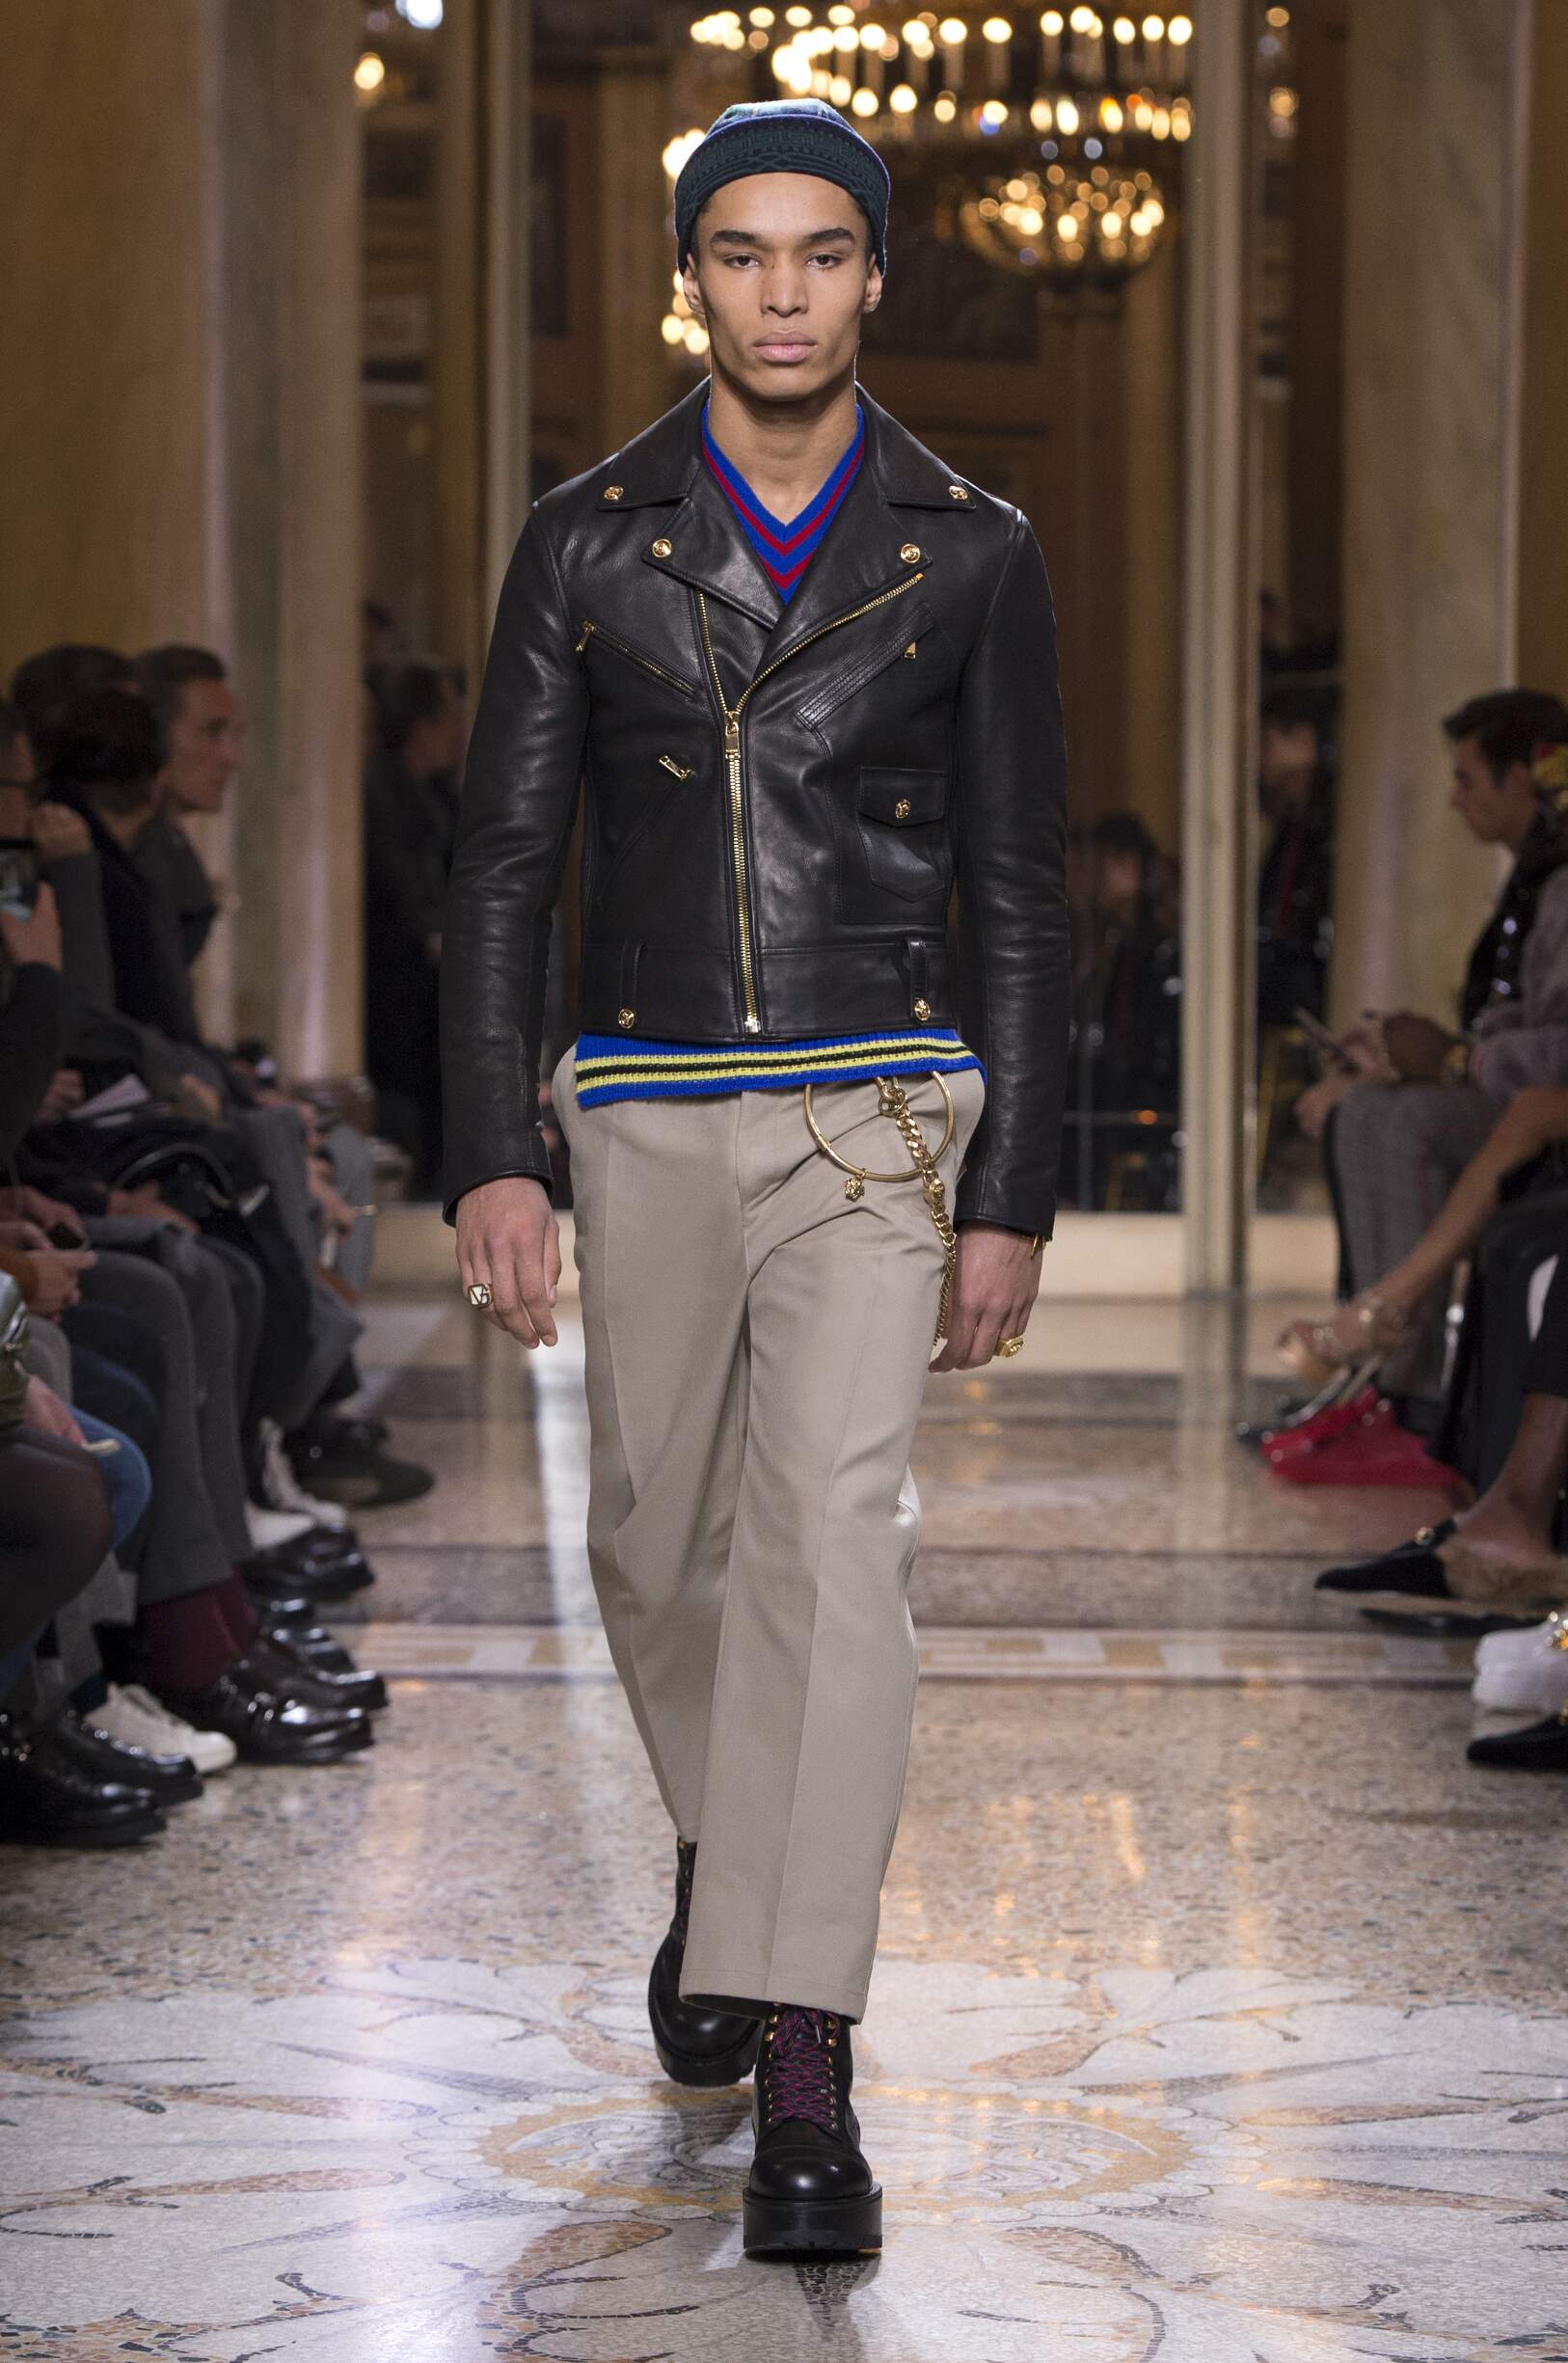 VERSACE FALL WINTER 2018 MEN’S COLLECTION | The Skinny Beep